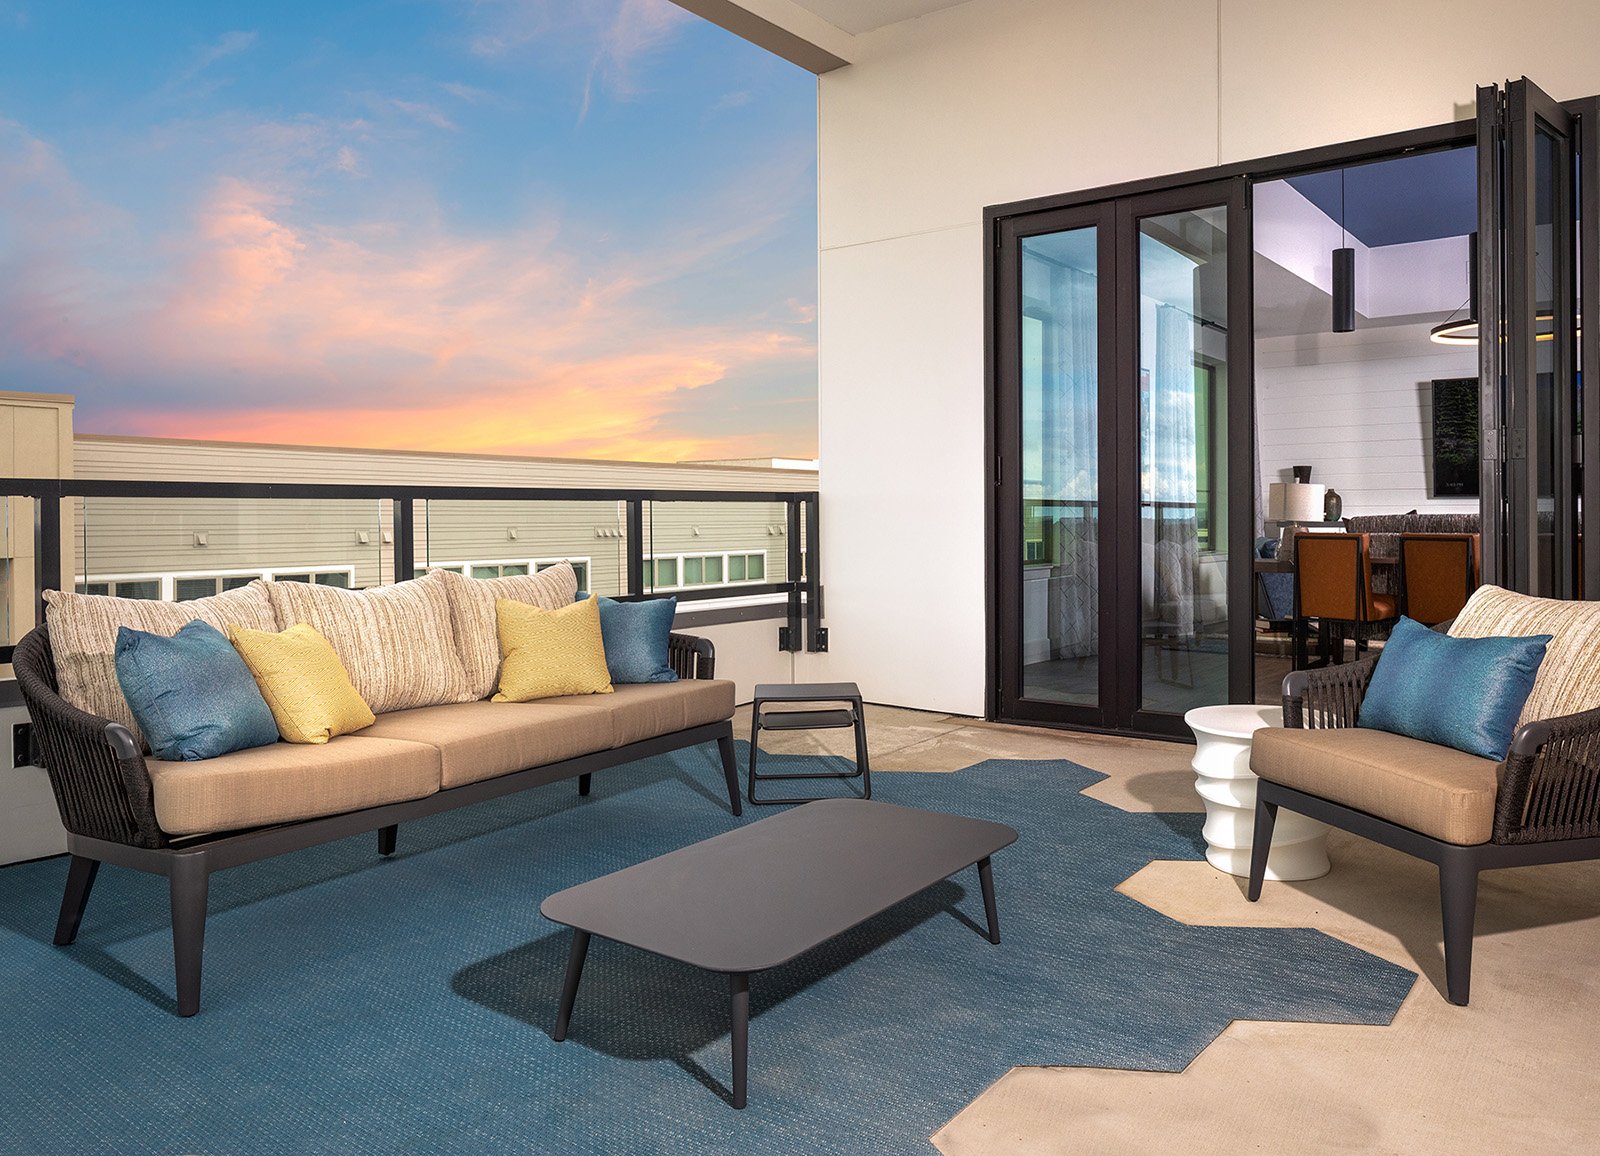 Rooftop terrace with sofa and view of the sky at AVE Austin apartment building.